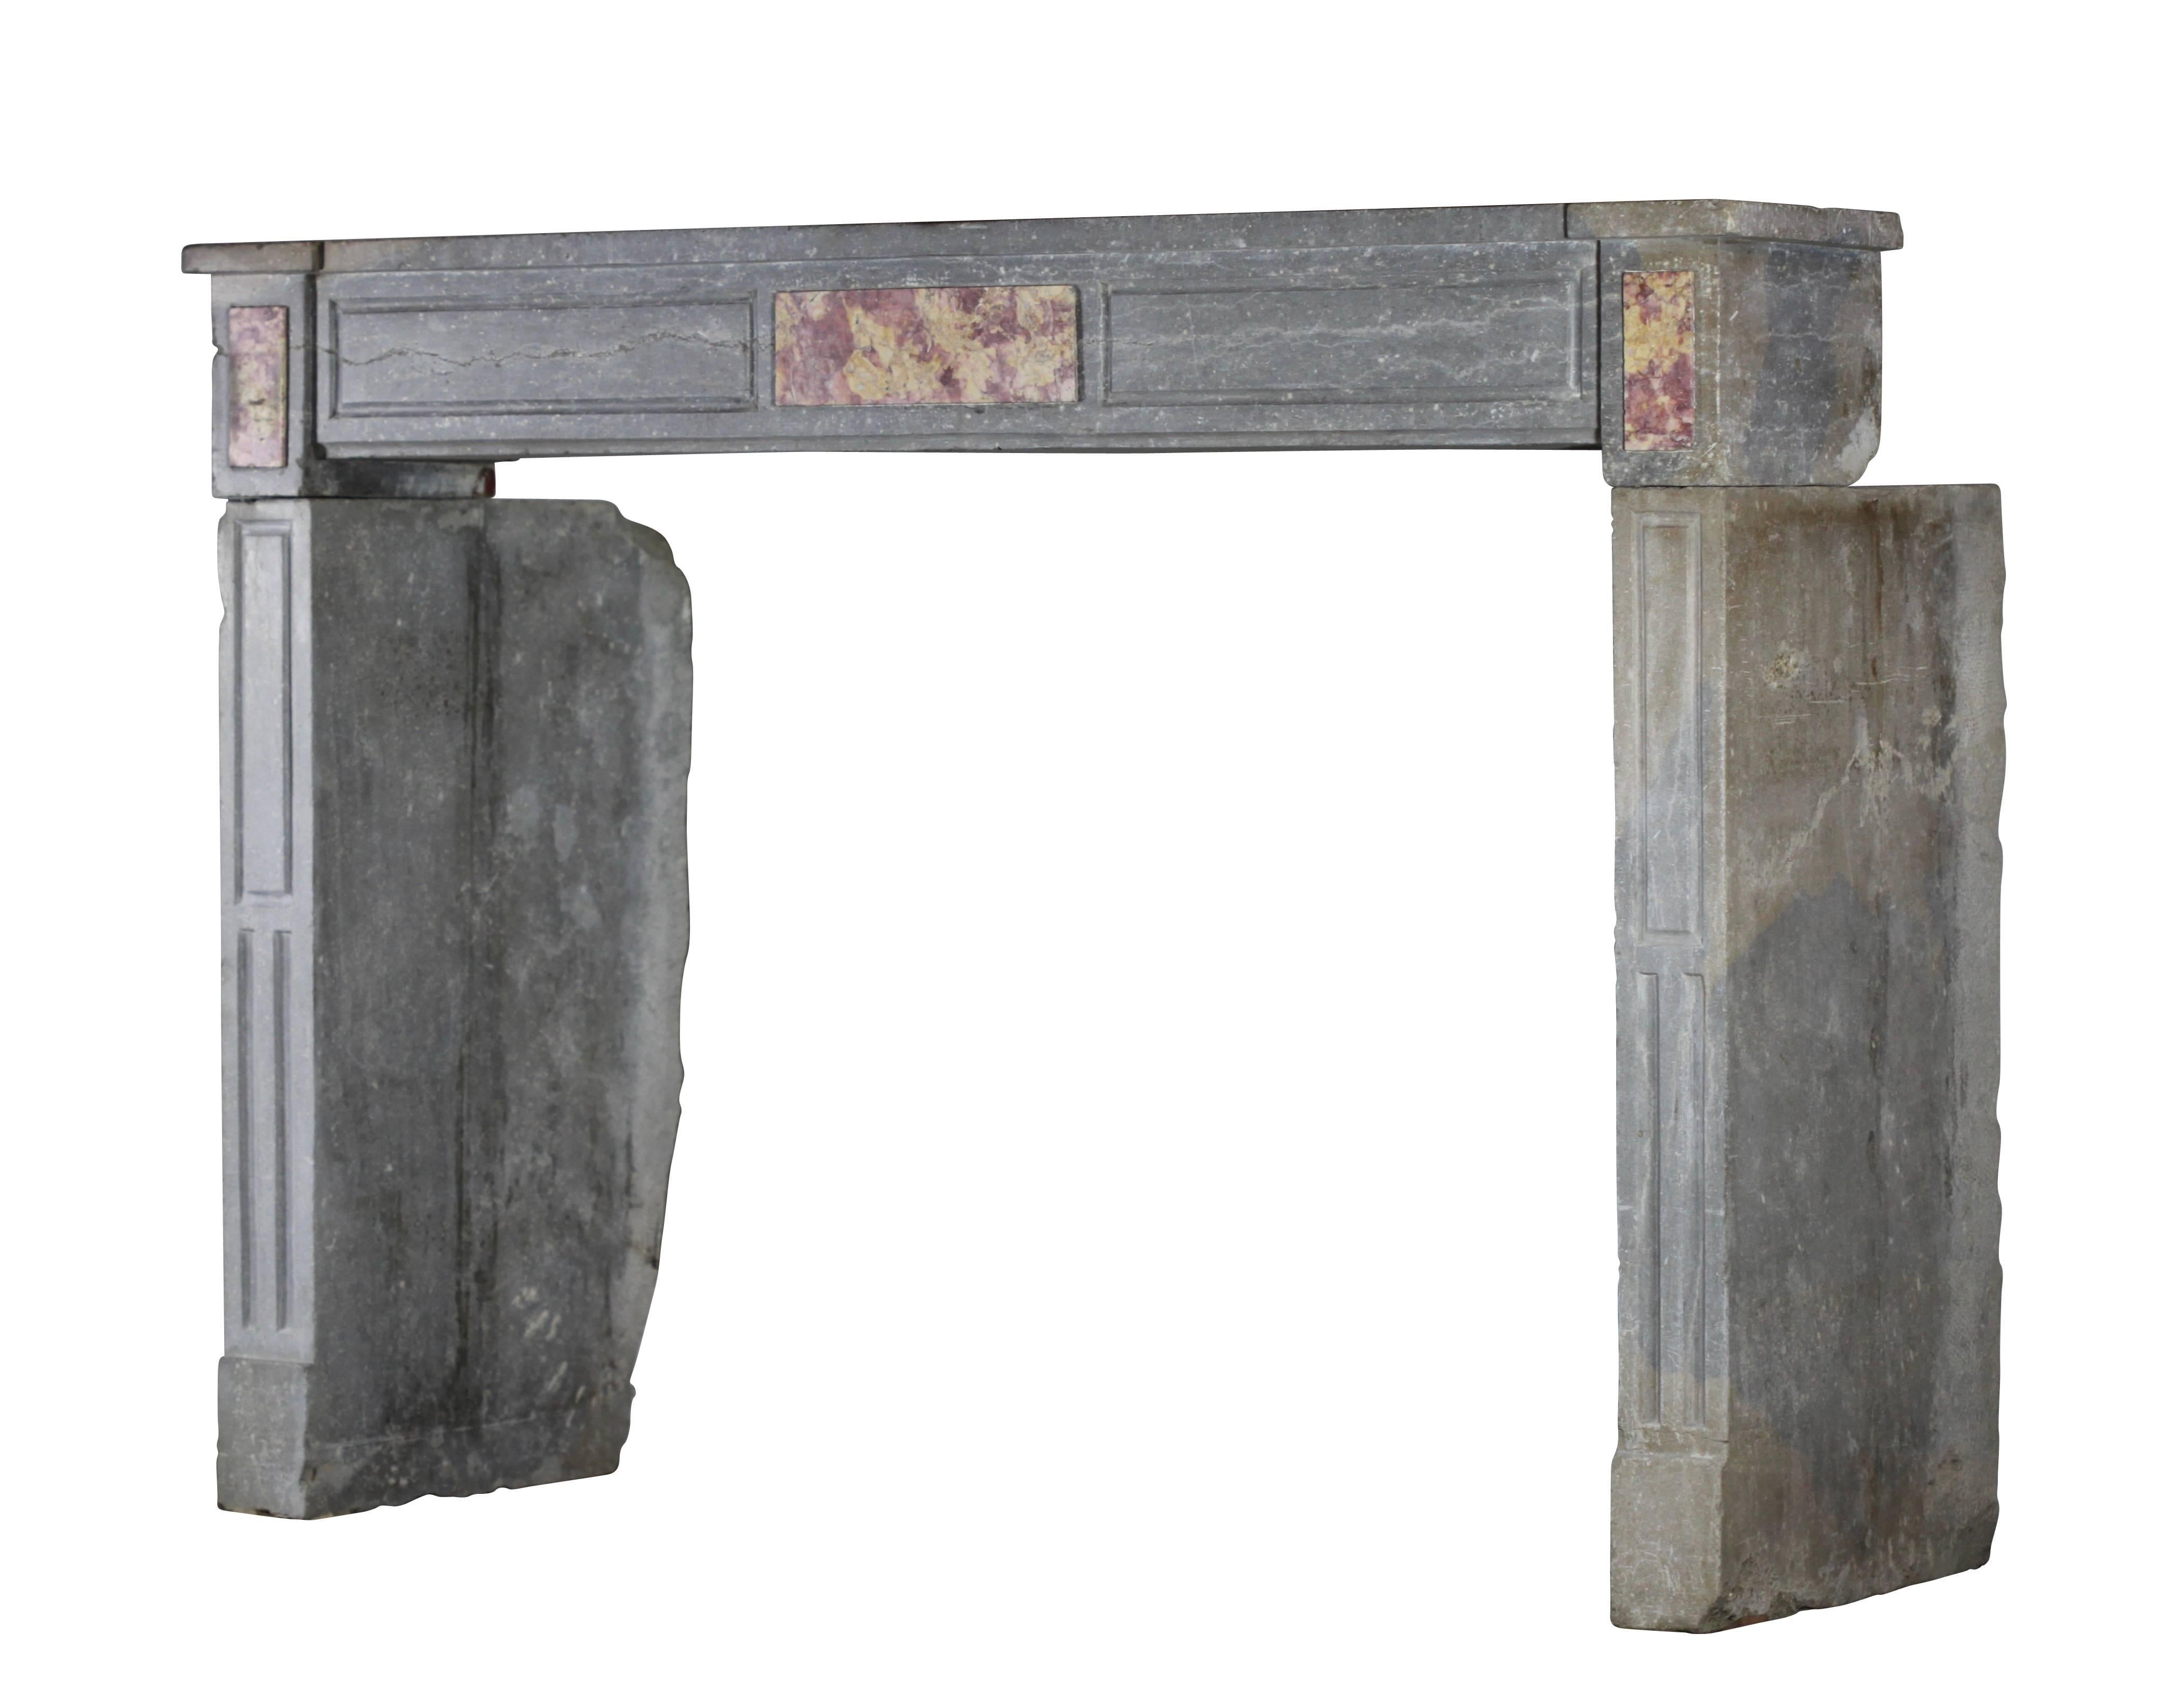 This antique fireplace surround in beaujolais bicolor hard stone, named Buxy with an Italian influence and Brocatelle de Spain marble inlay comes out of a paneled room. It has a little country touch.
Measures:
149.5 cm EW 58.85",
110 cm EH